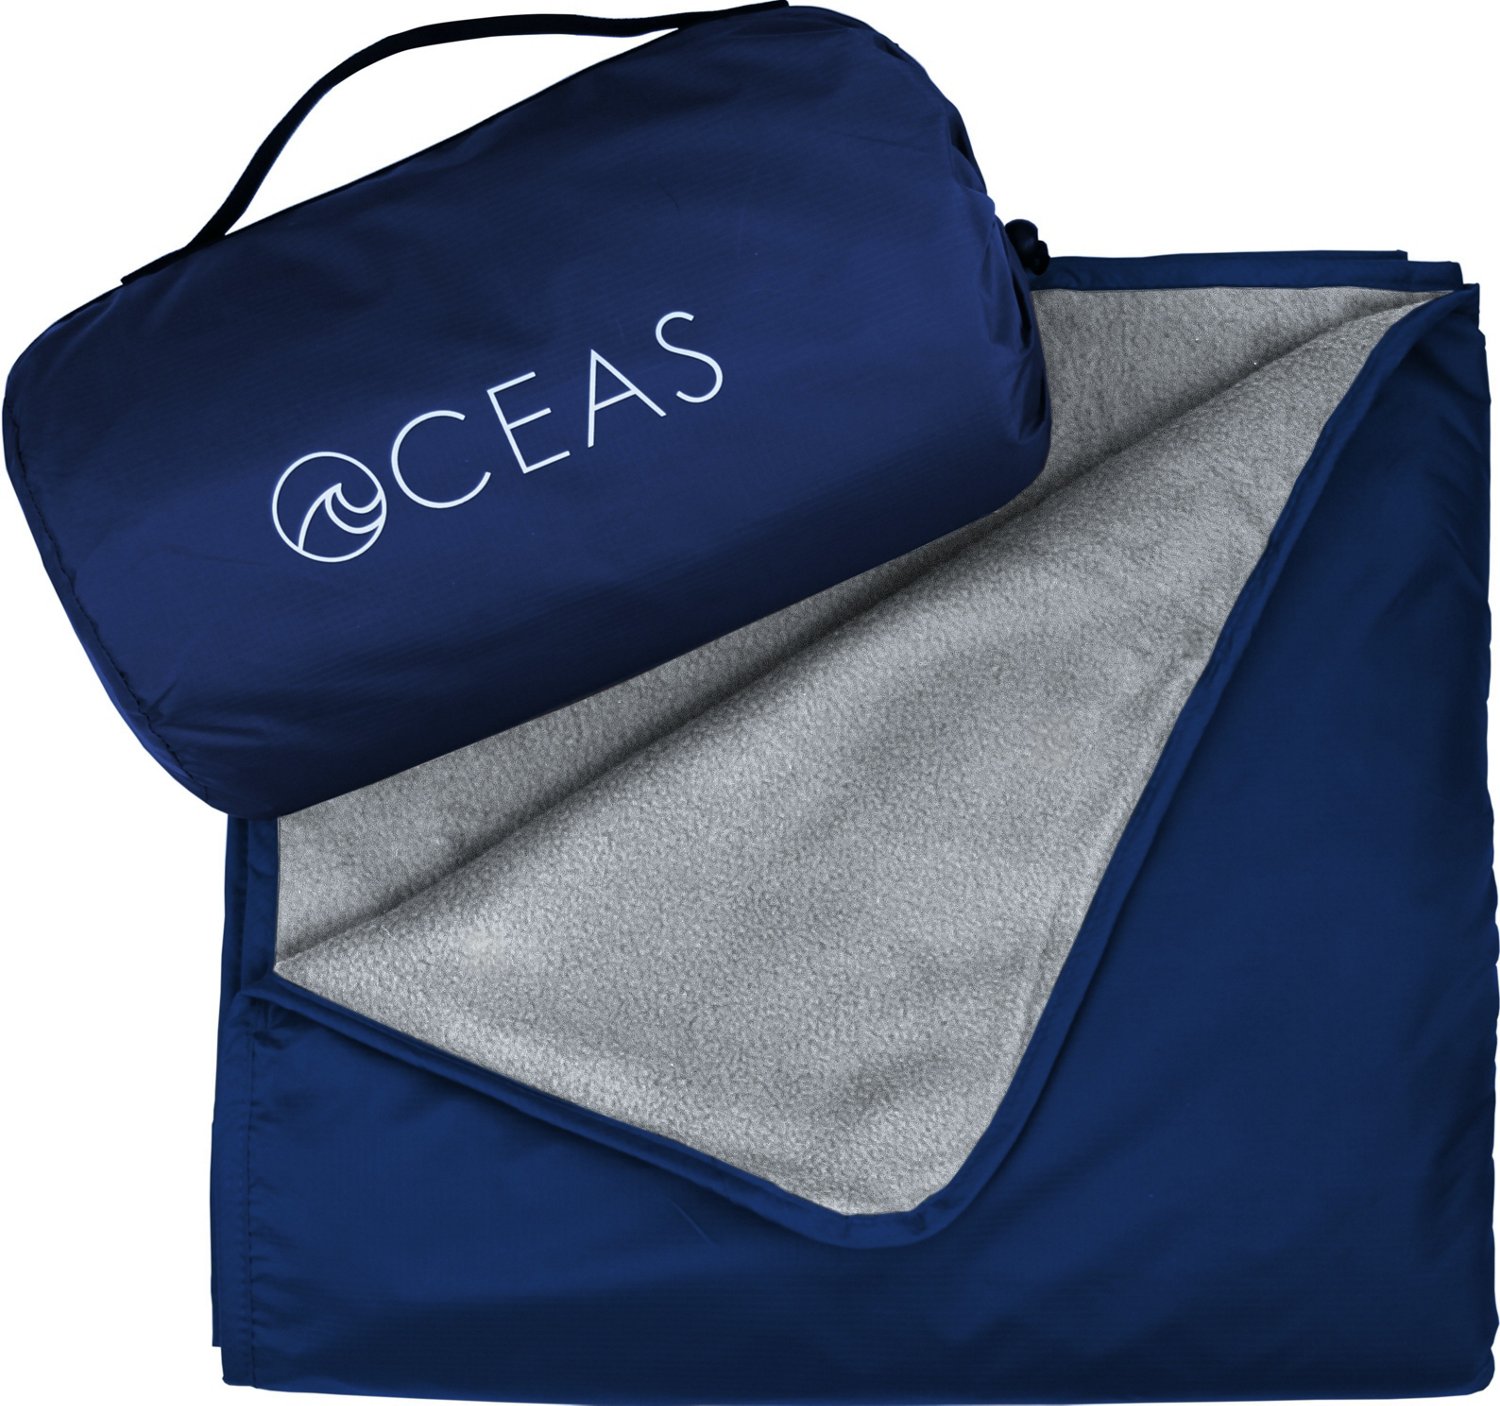  Oceas Outdoor Waterproof Stadium Blanket - Thicker Weather  Proof and Windproof Blankets for Camping, Sporting Events, Picnic and Car  Use - 100% Waterproof Insulated Foldable Blanket and Throws : Sports &  Outdoors